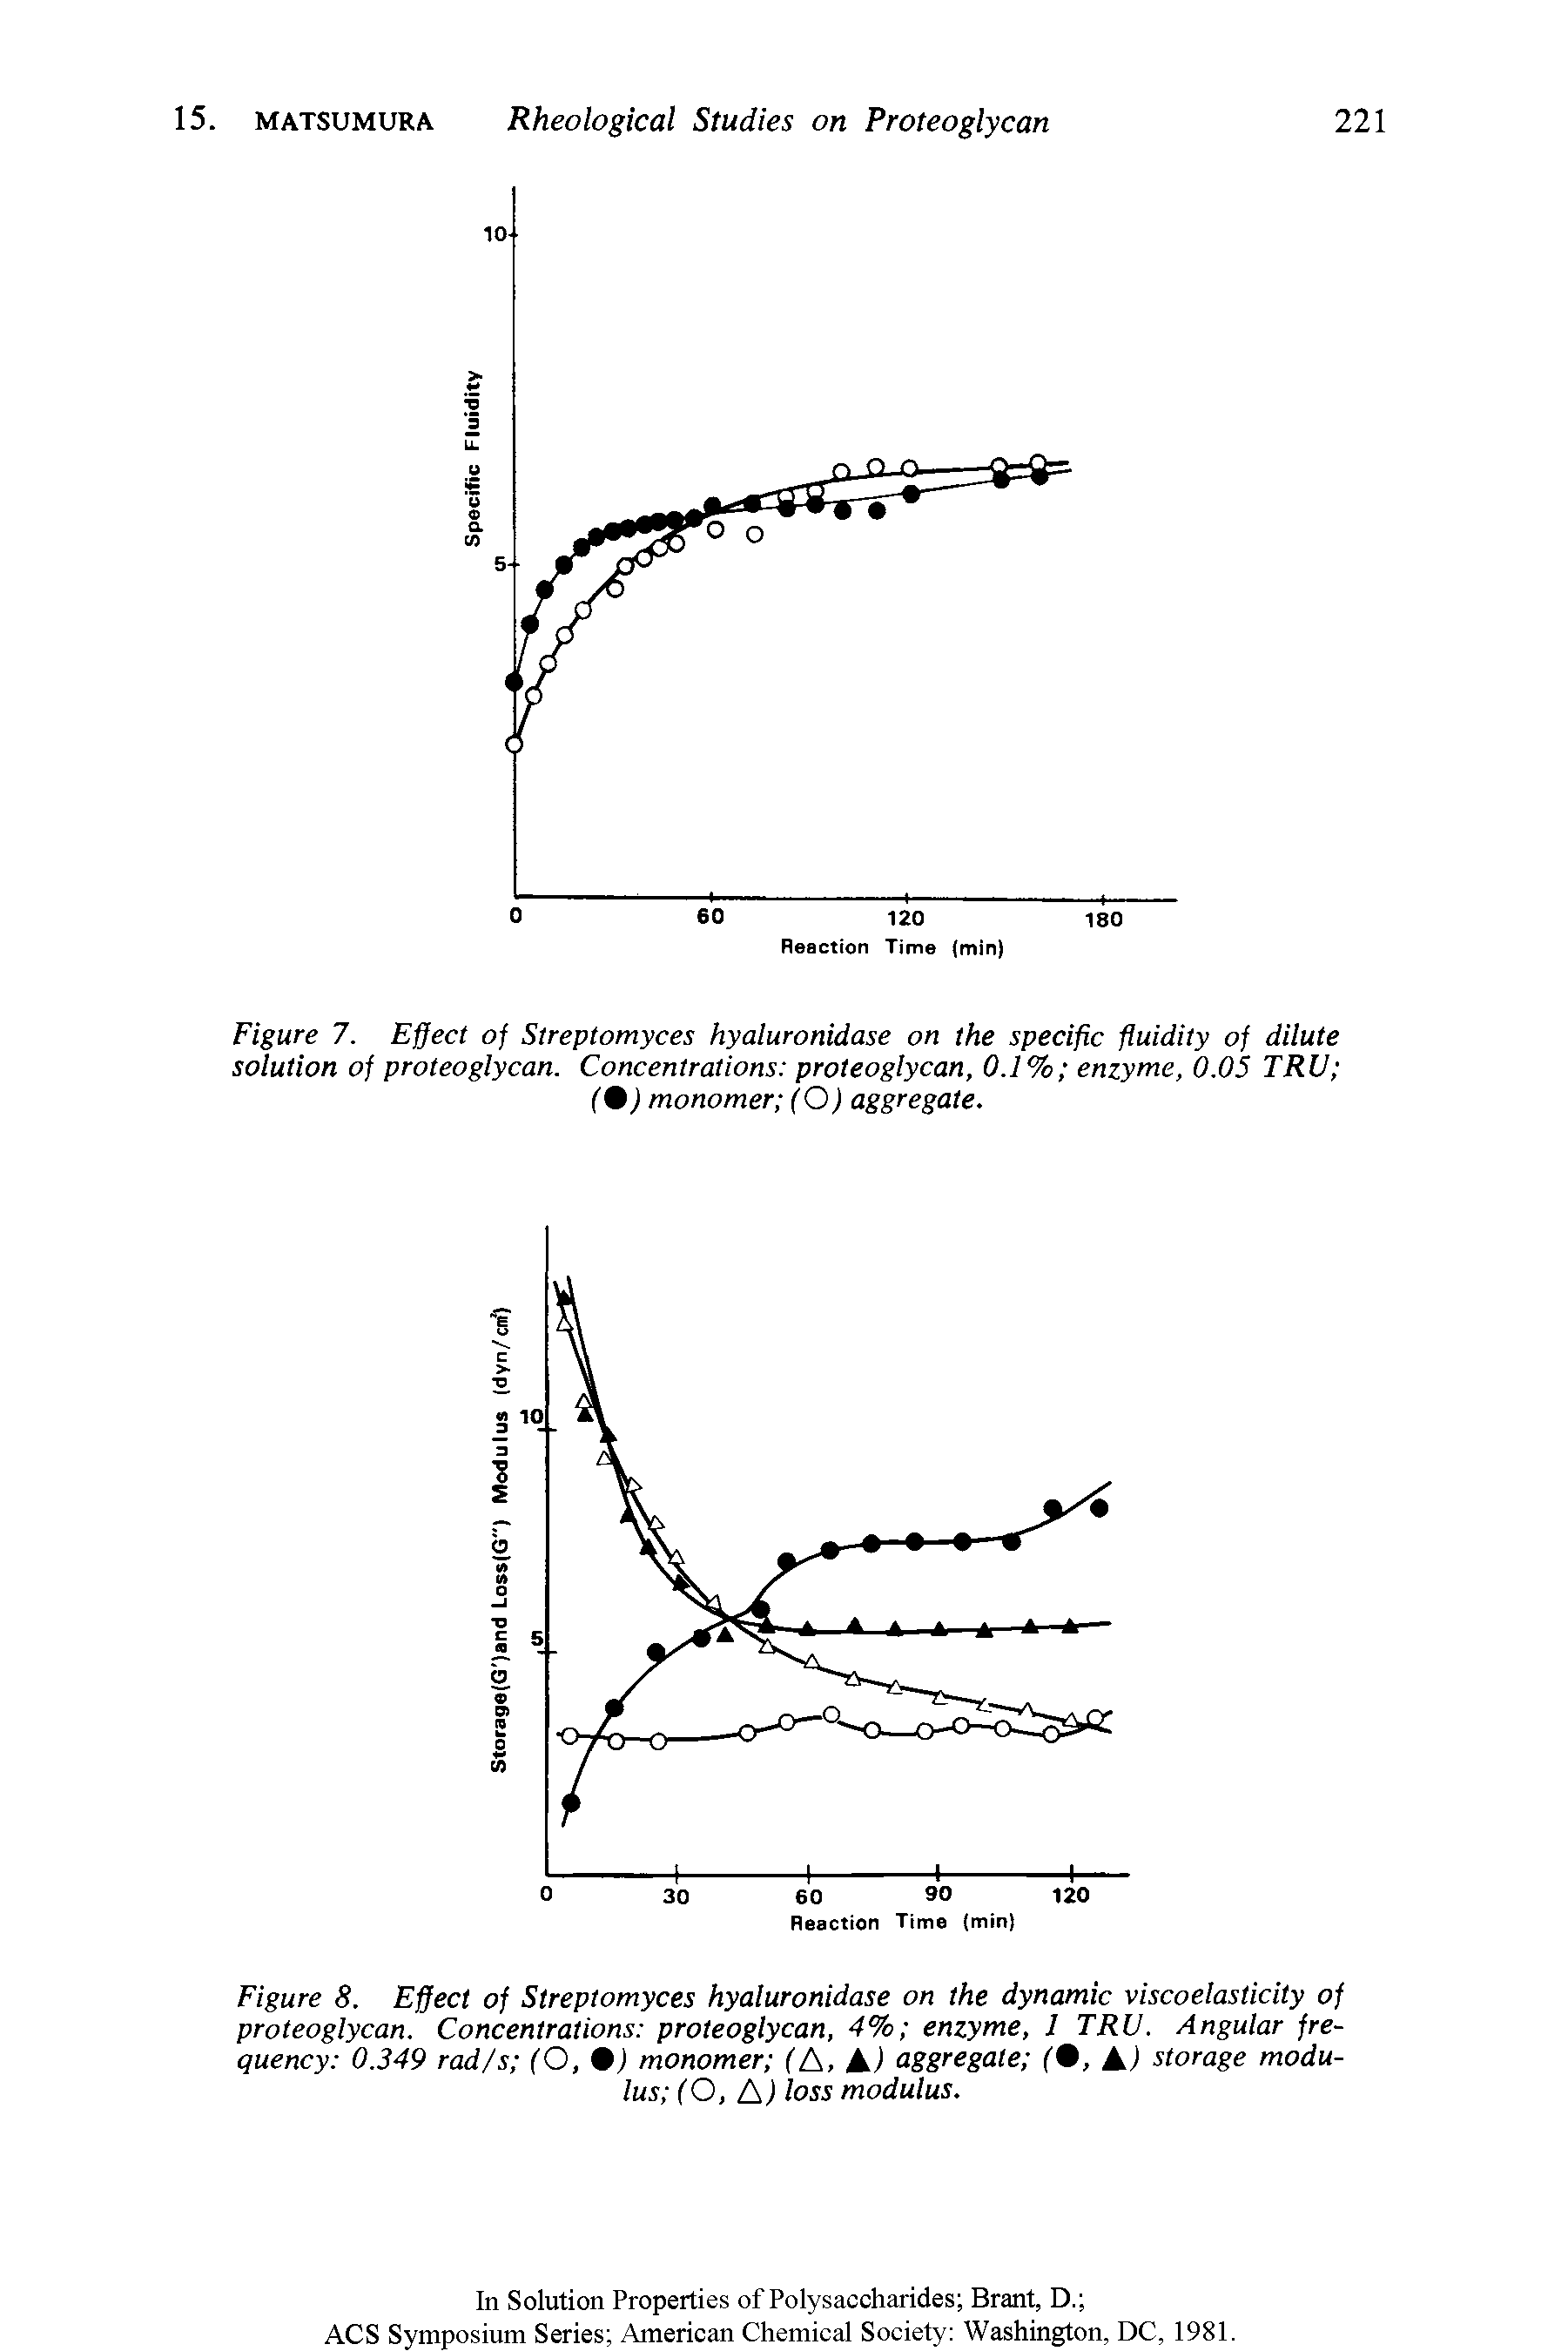 Figure 7. Effect of Streptomyces hyaluronidase on the specific fluidity of dilute solution of proteoglycan. Concentrations proteoglycan, 0.1% enzyme, 0.05 TRU (9) monomer (O) aggregate.